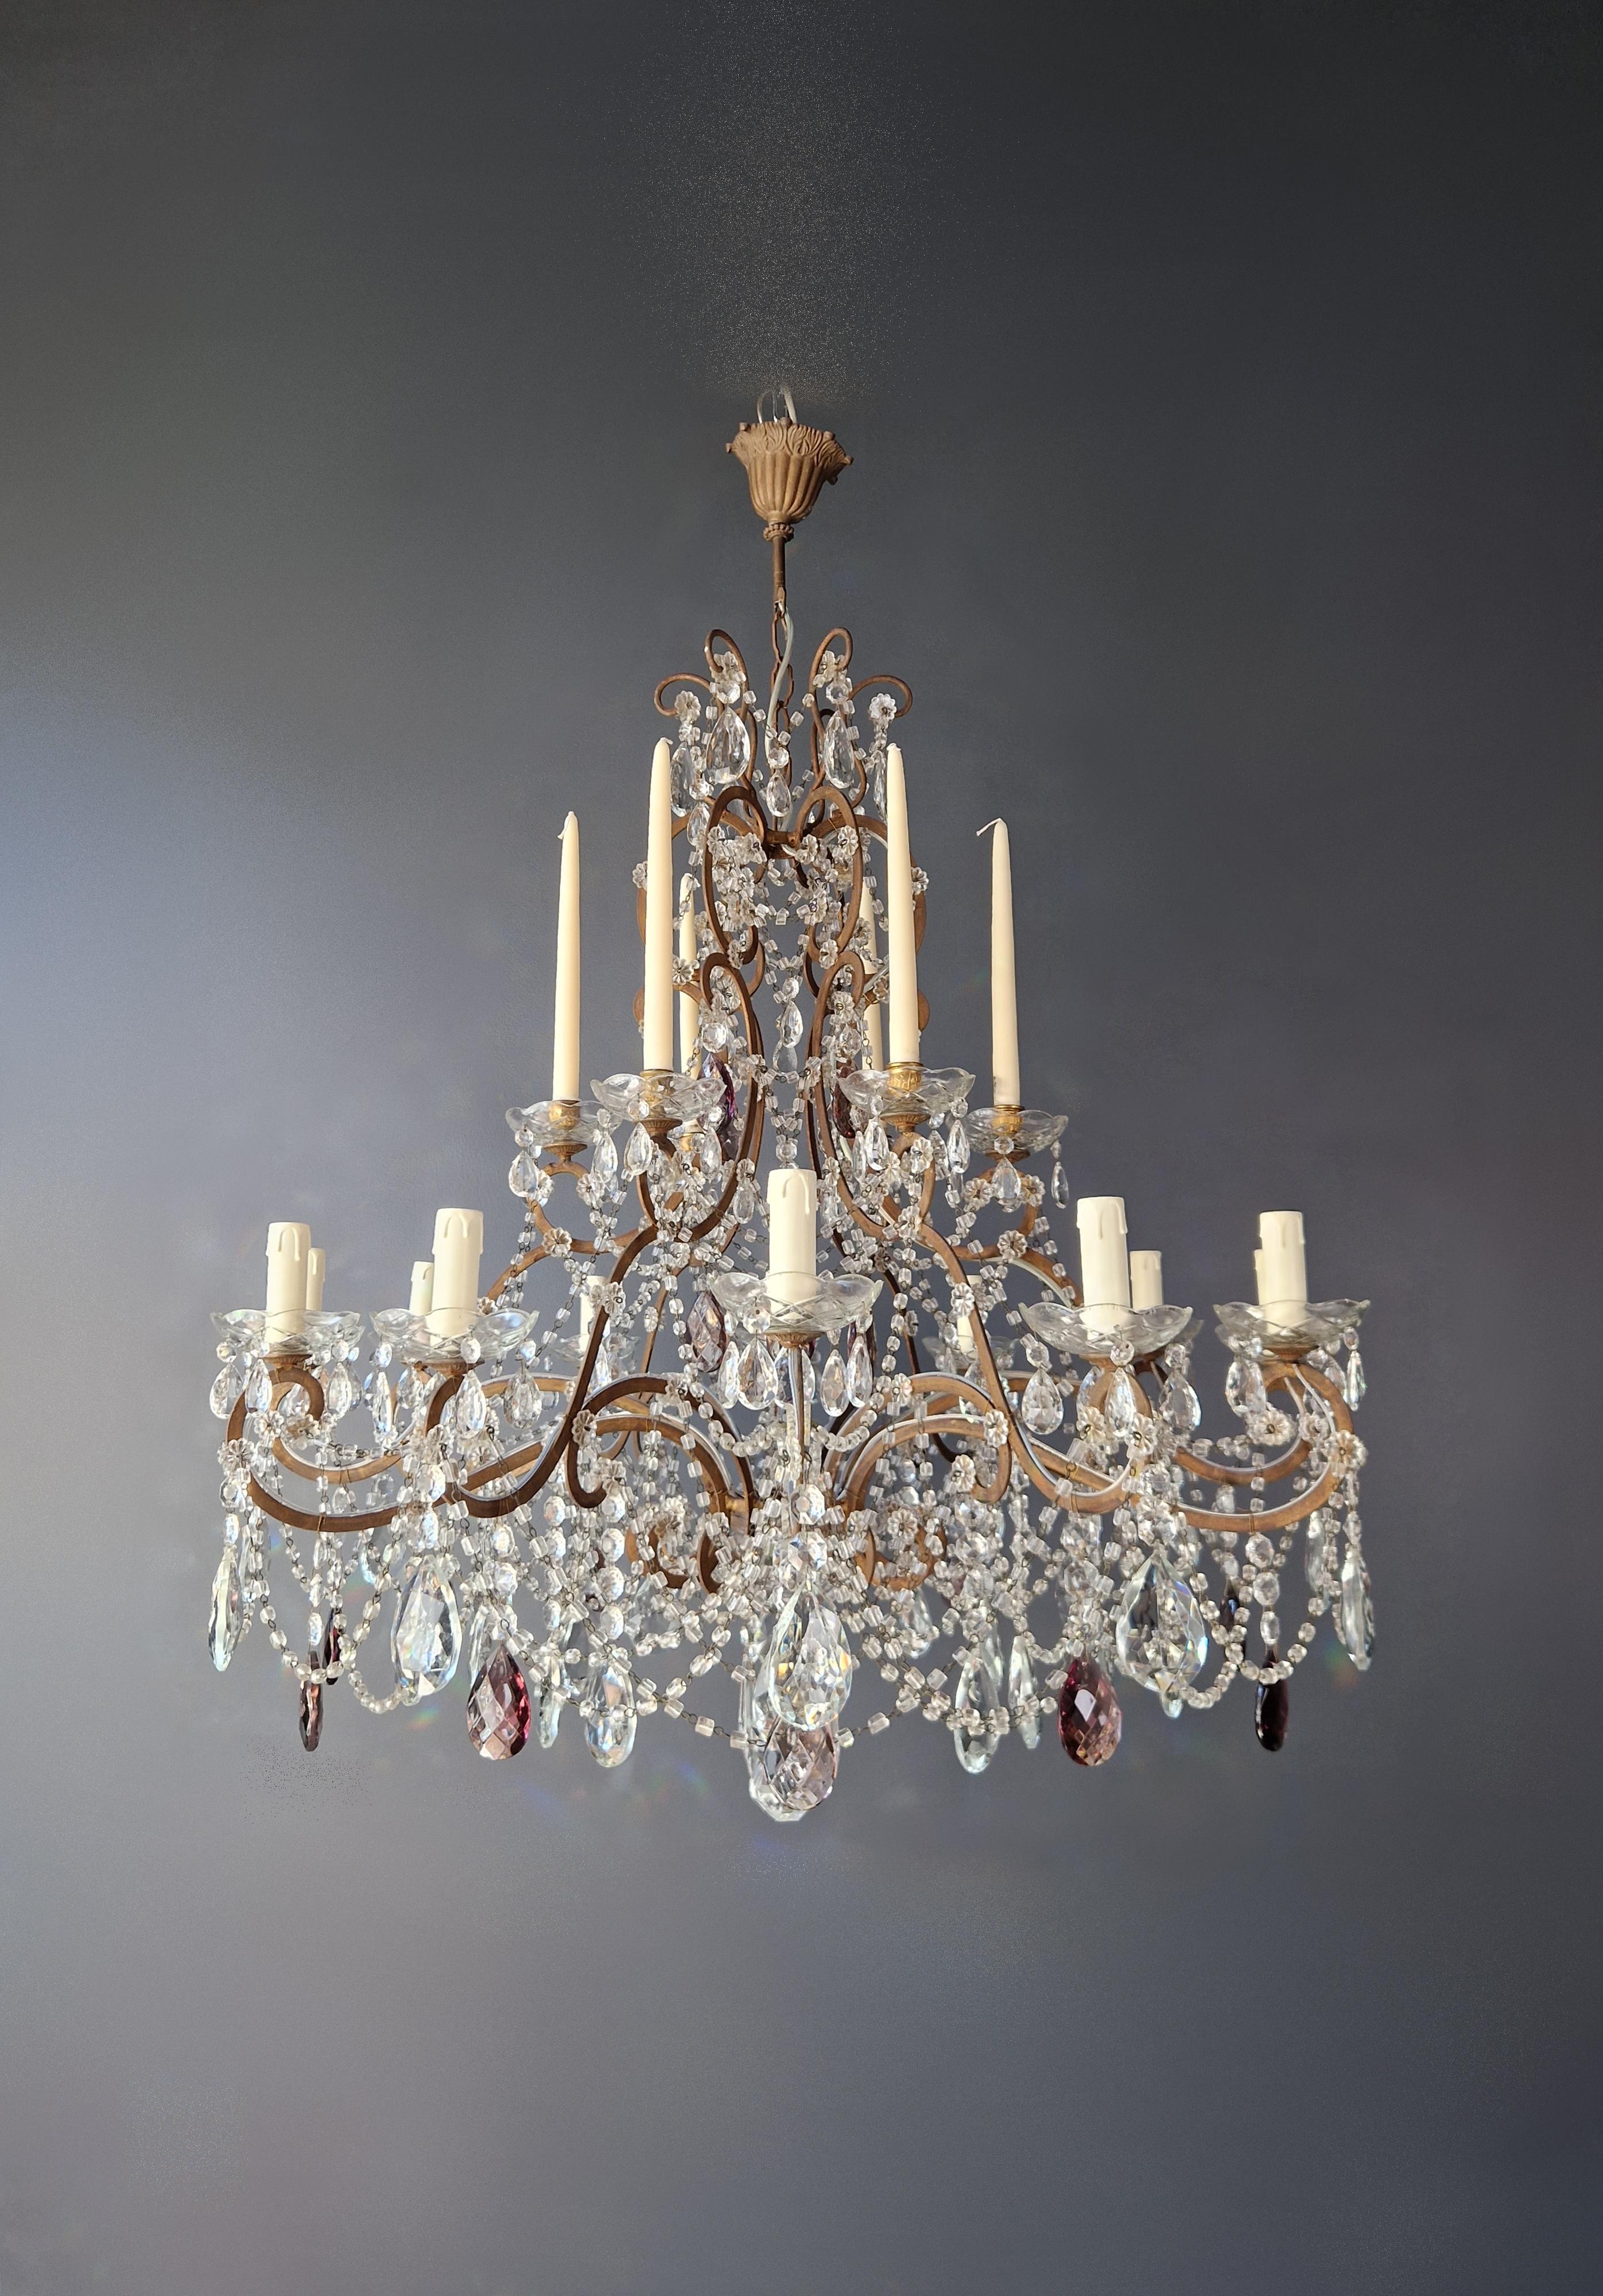 Restored Antique Chandelier: A Timeless Masterpiece Rediscovered in Berlin

Presenting an enchanting antique chandelier that has been meticulously restored in Berlin, reviving its timeless charm and elegance. With its electrical wiring adapted to